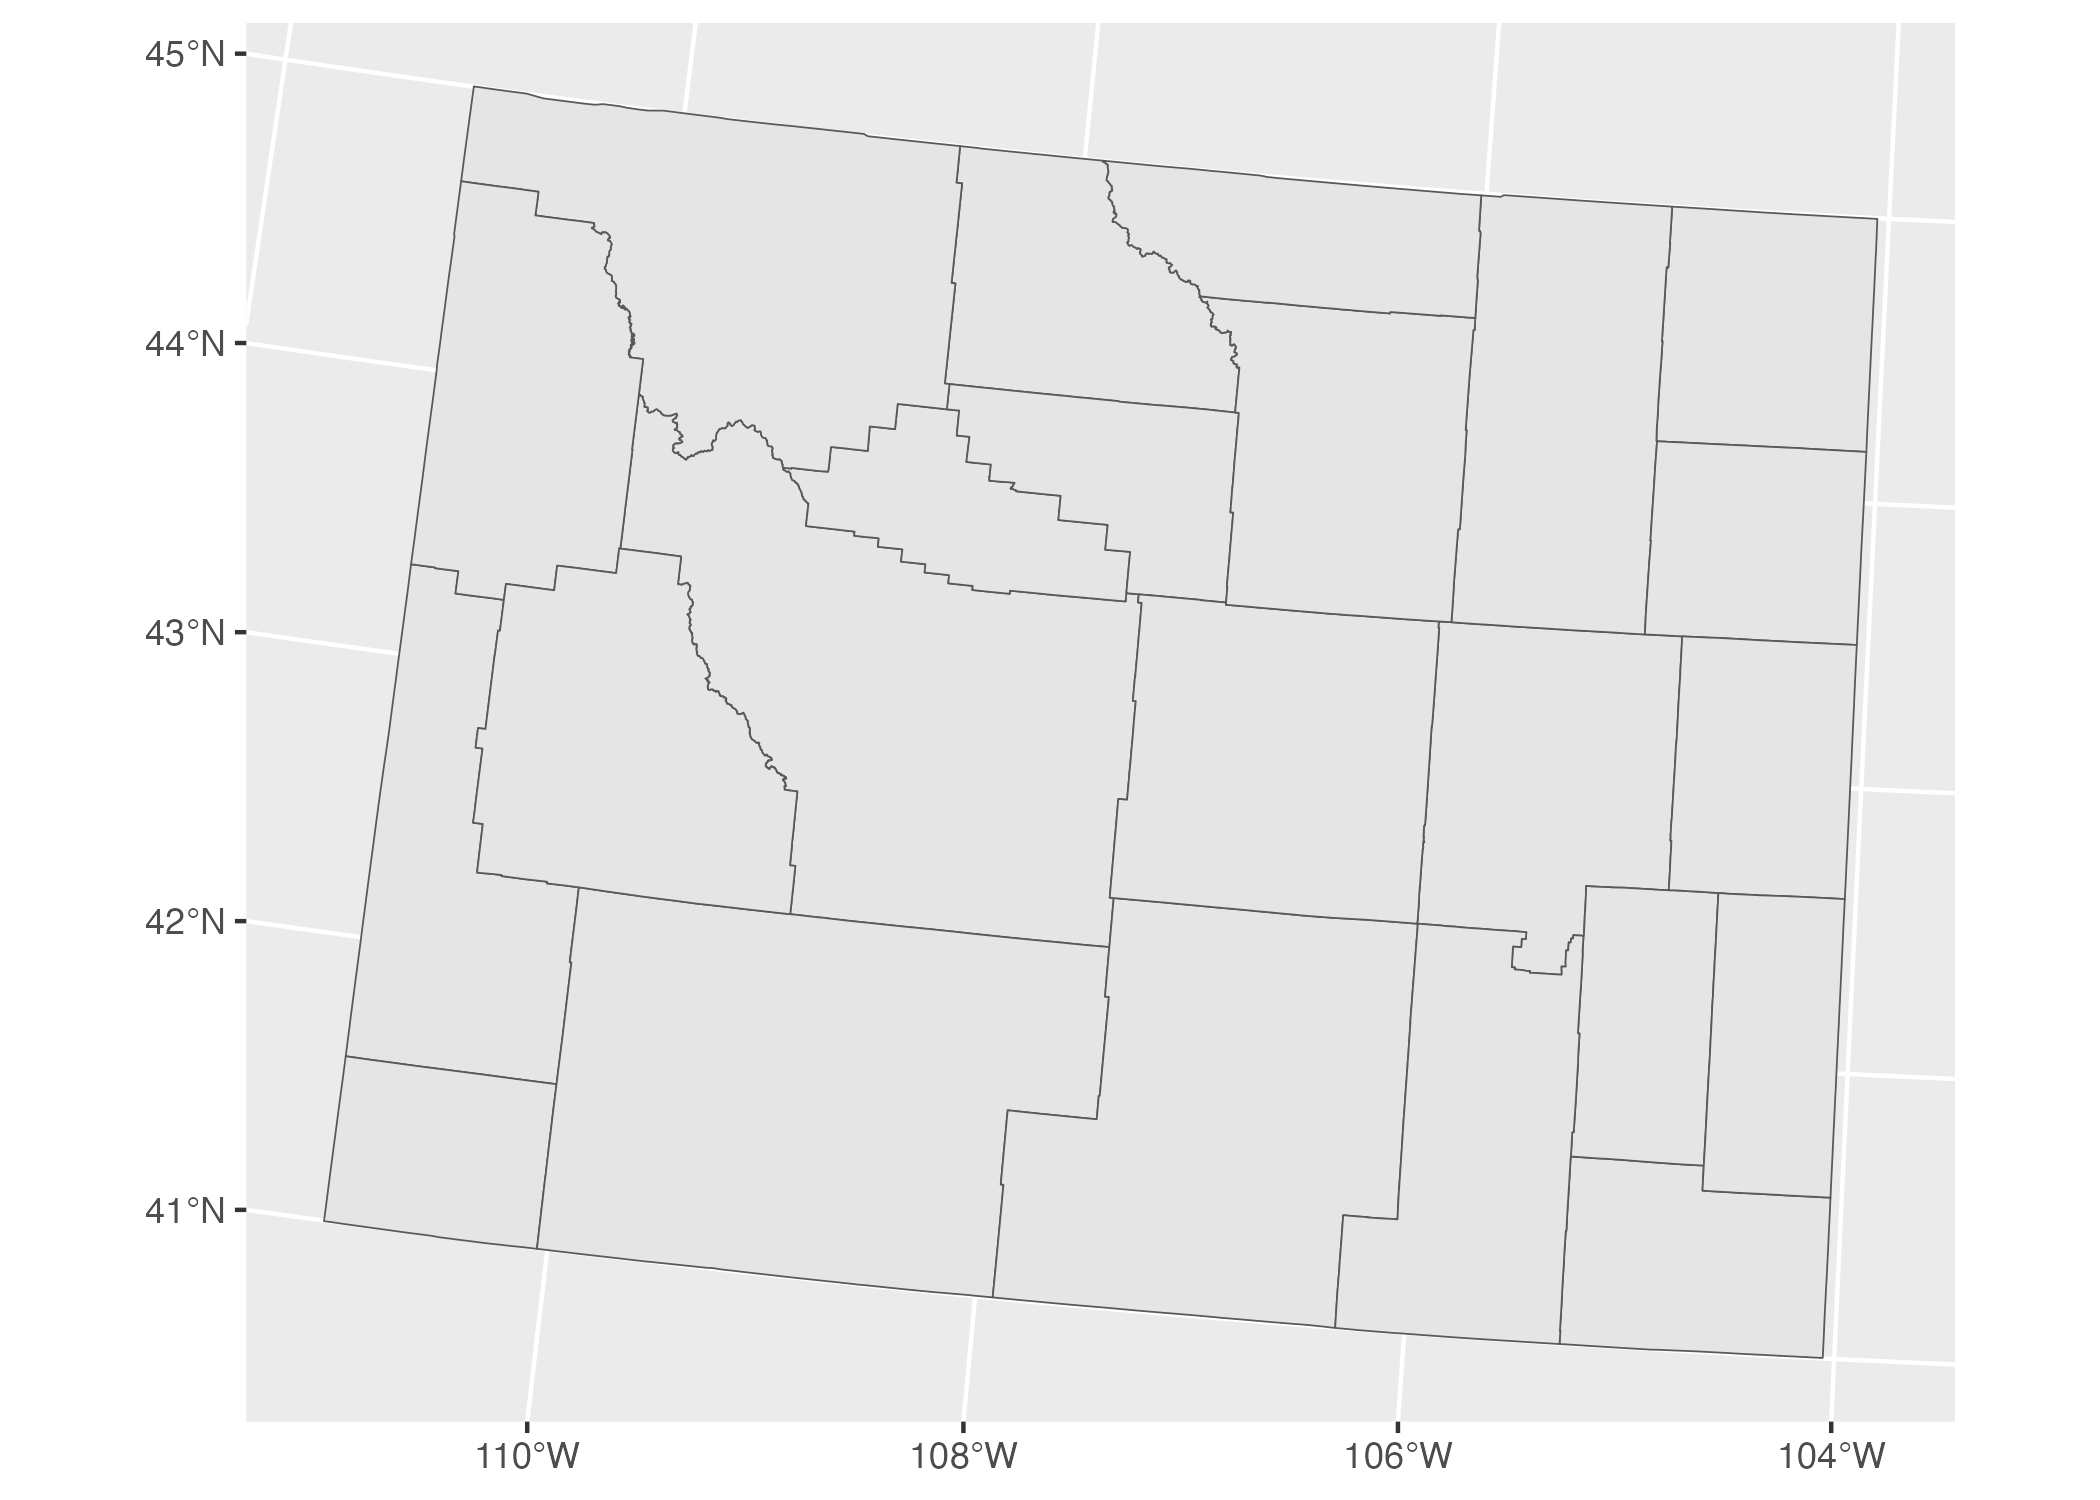 A map of Wyoming counties using the WGS84 projection